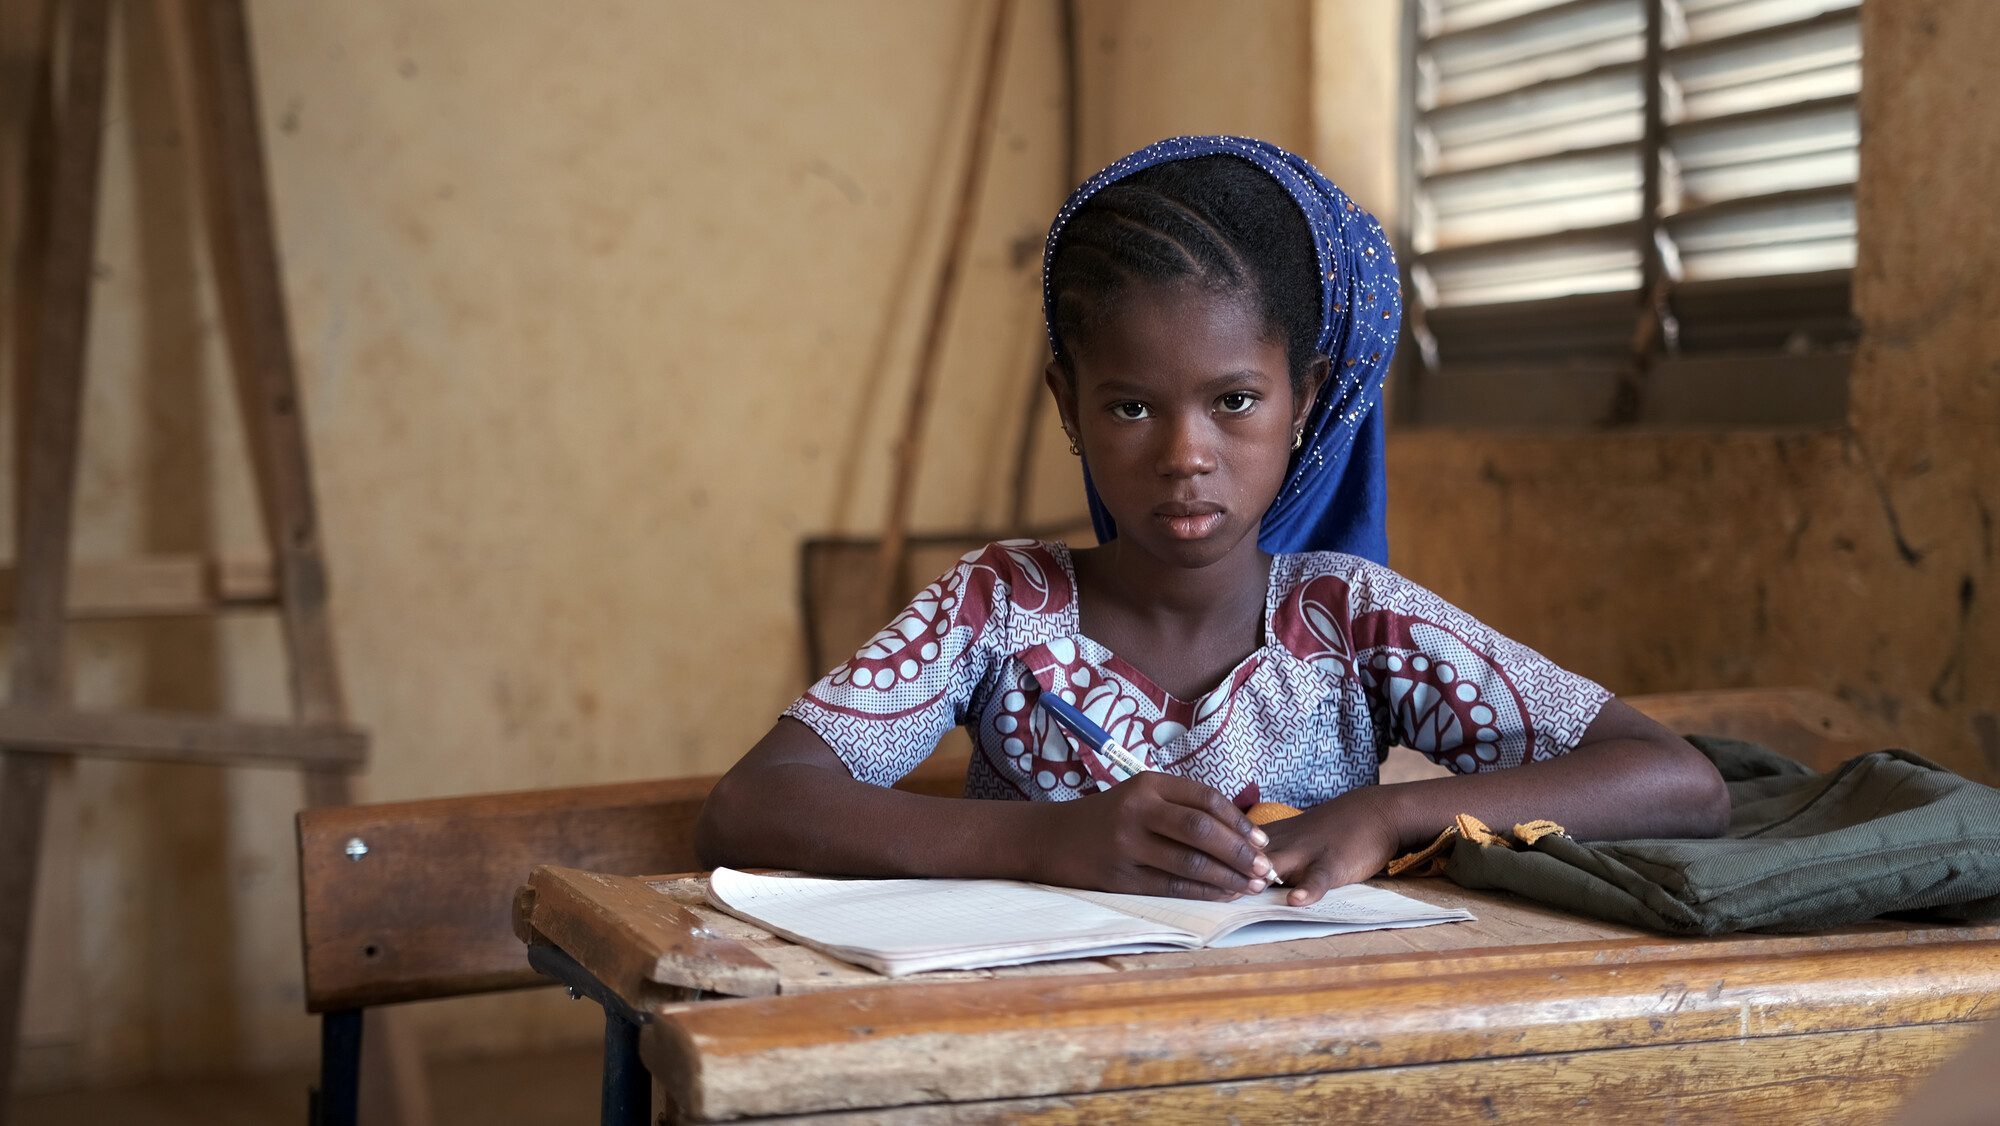 Currently in her third year of primary school in Mopti region, 12-year-old Salimata enjoys learning.